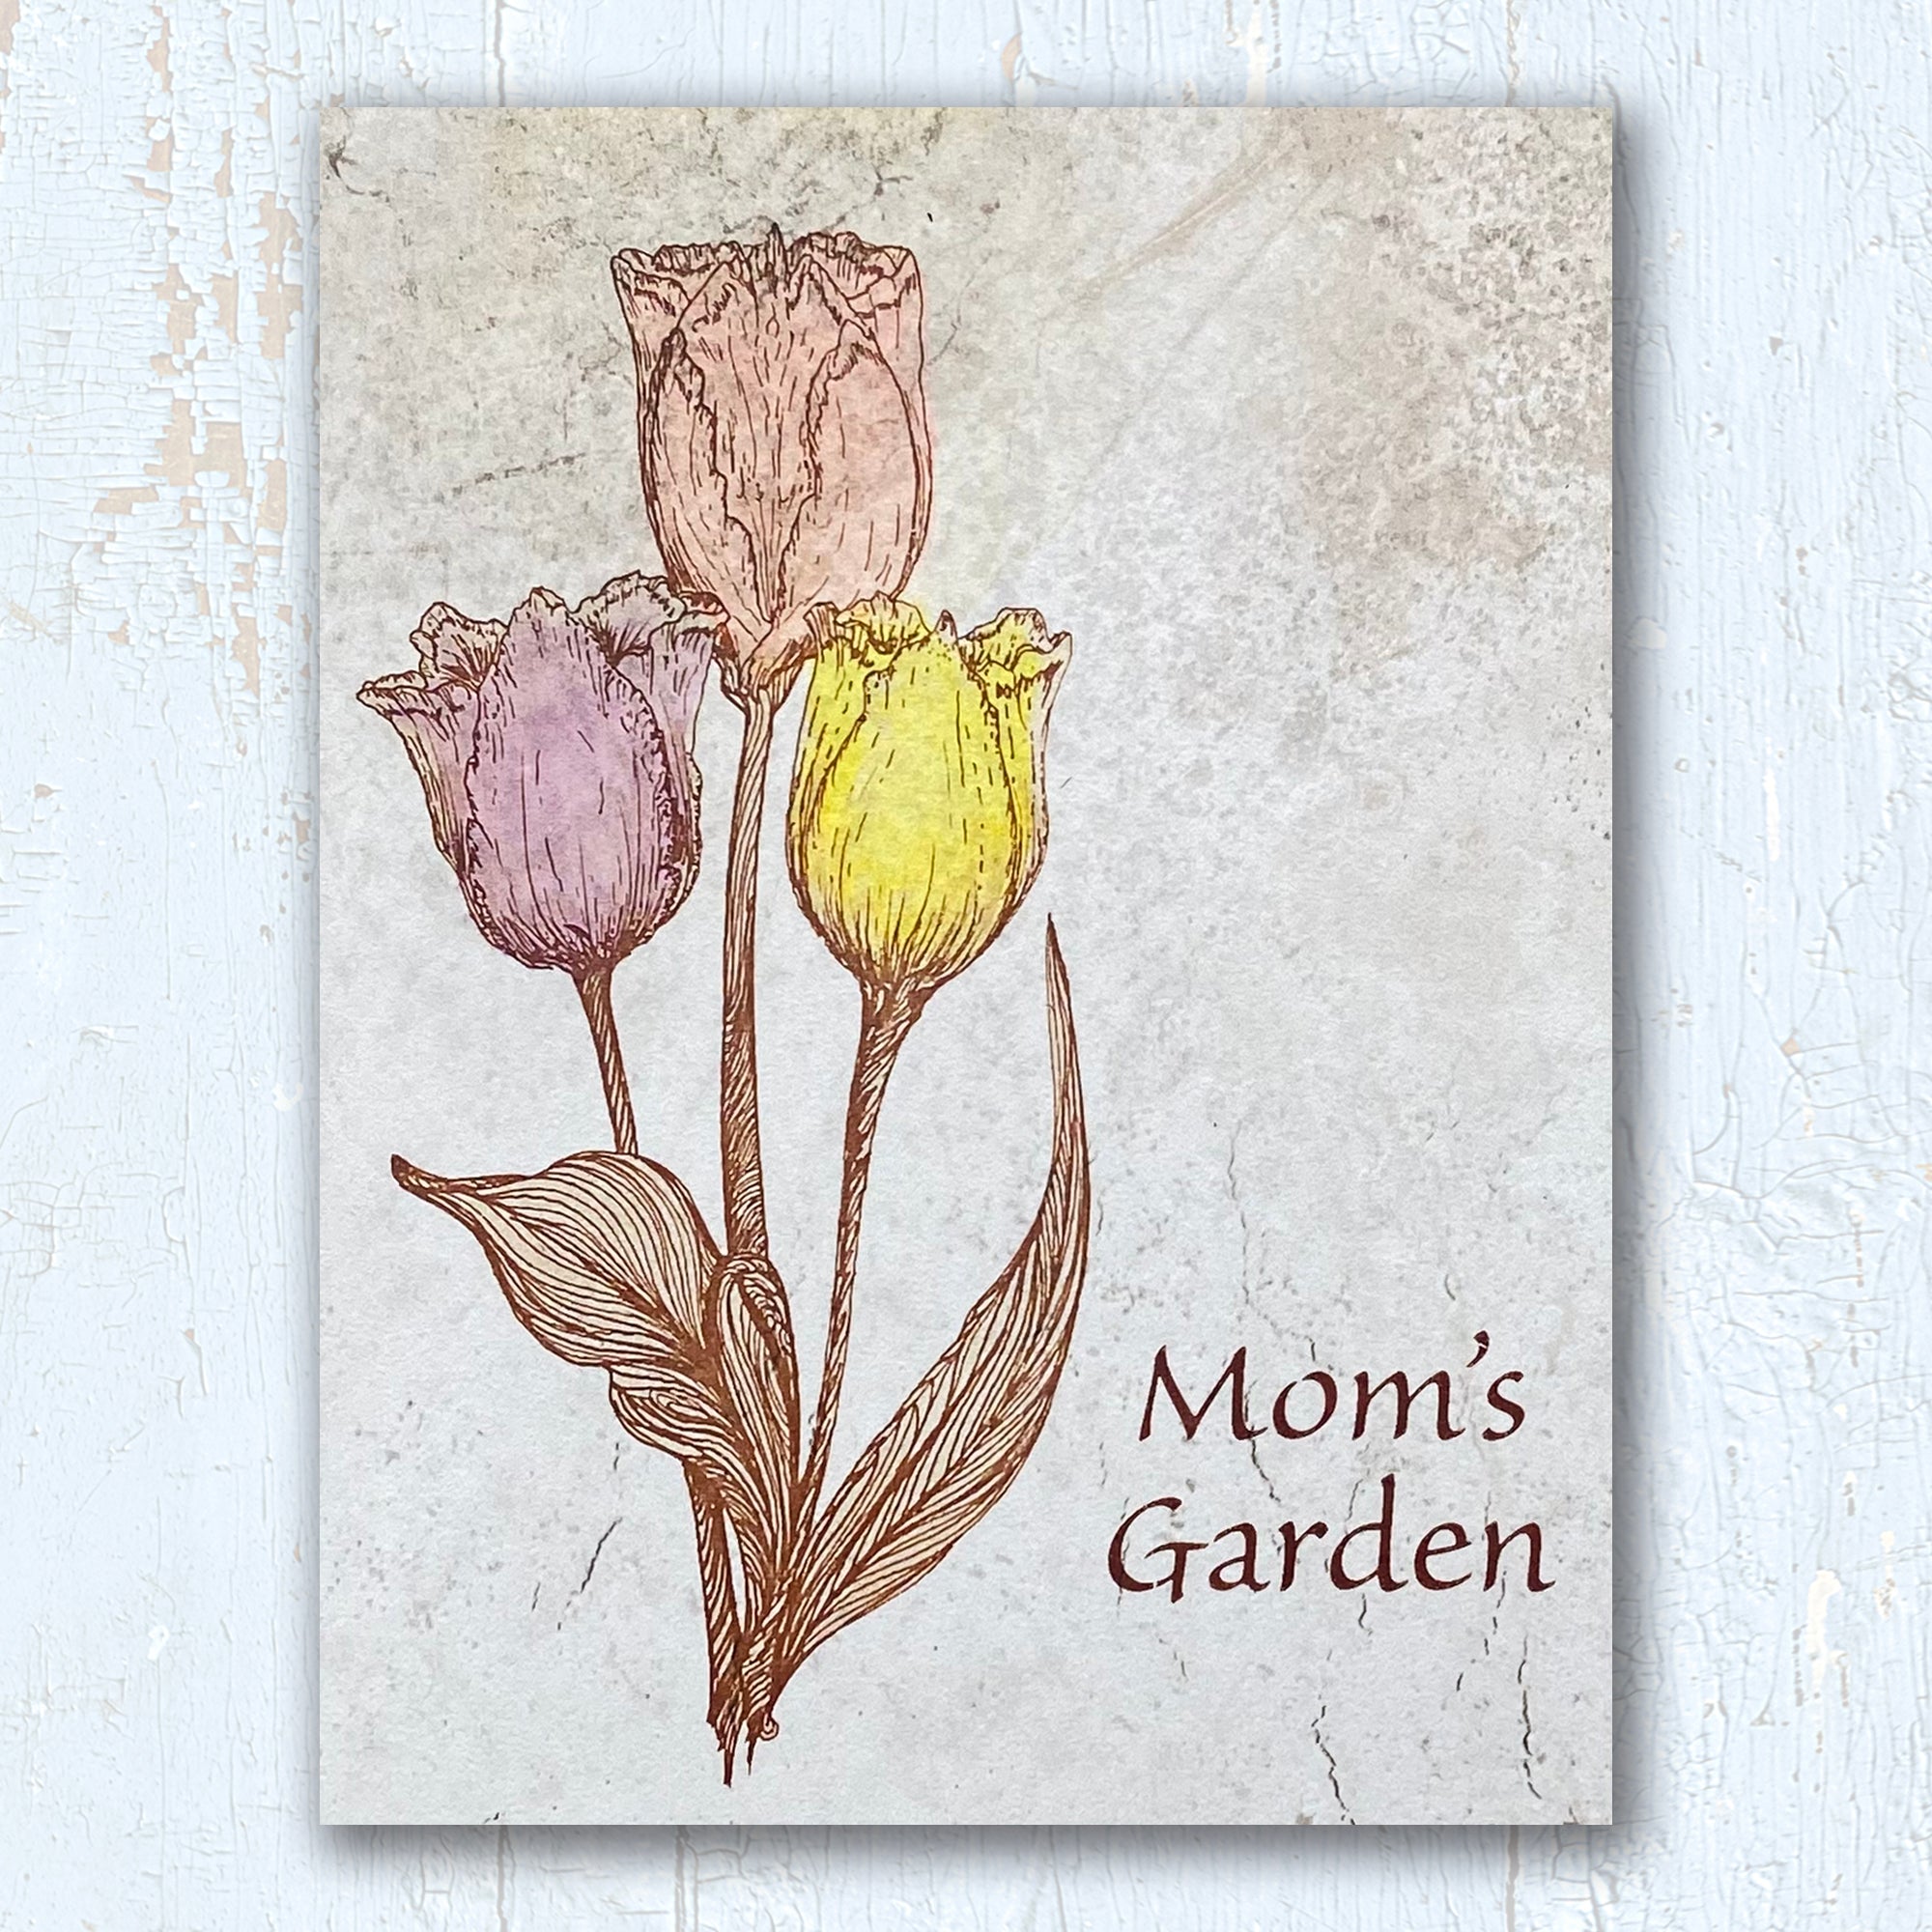 Tulips Garden Tile Personalized